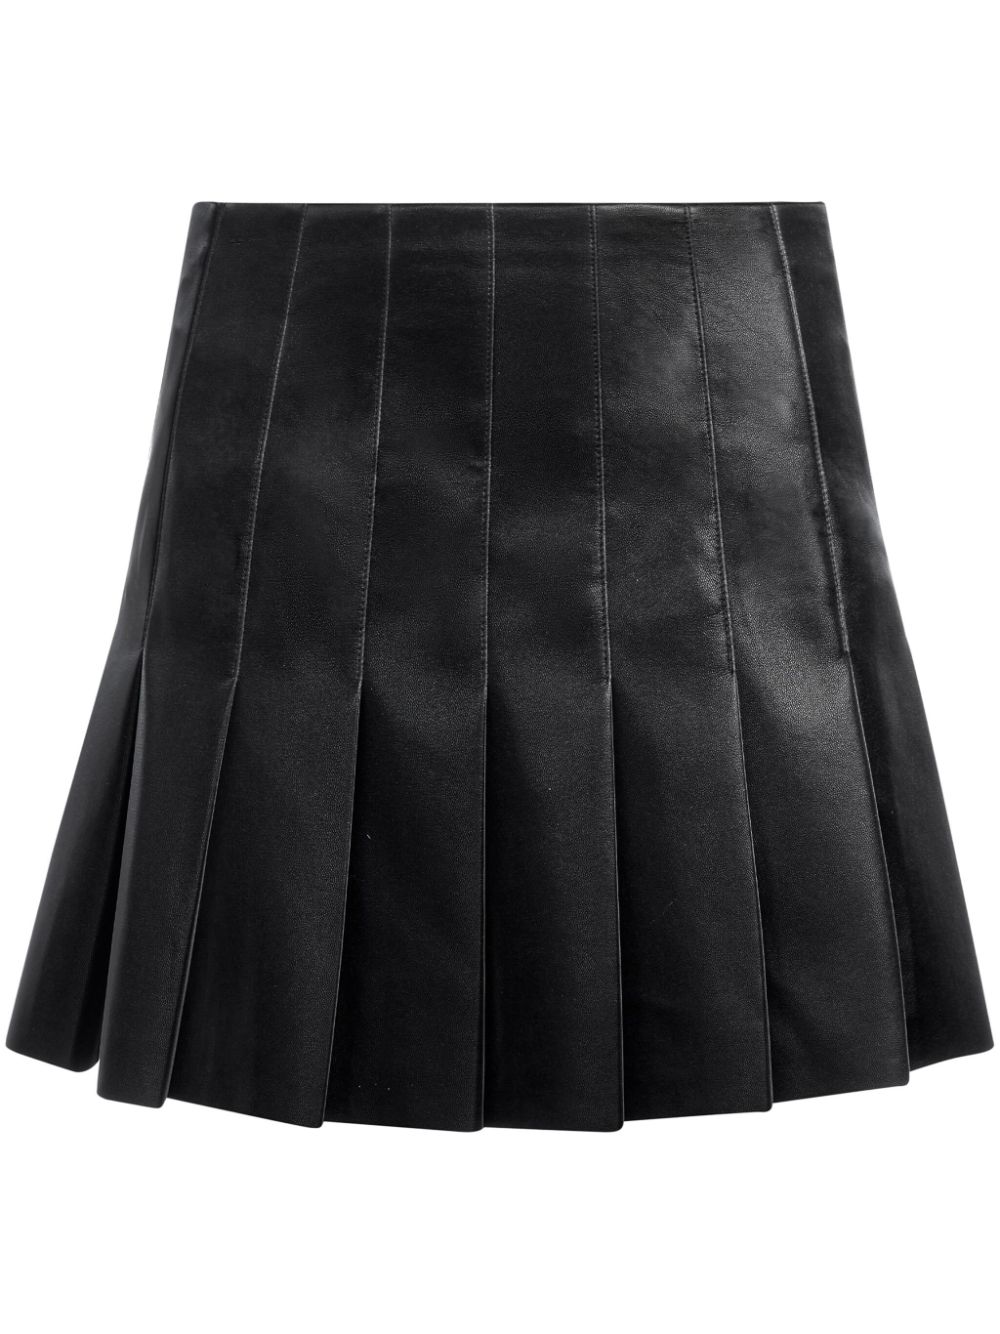 ALICE AND OLIVIA CARTER FULLY-PLEATED SKIRT